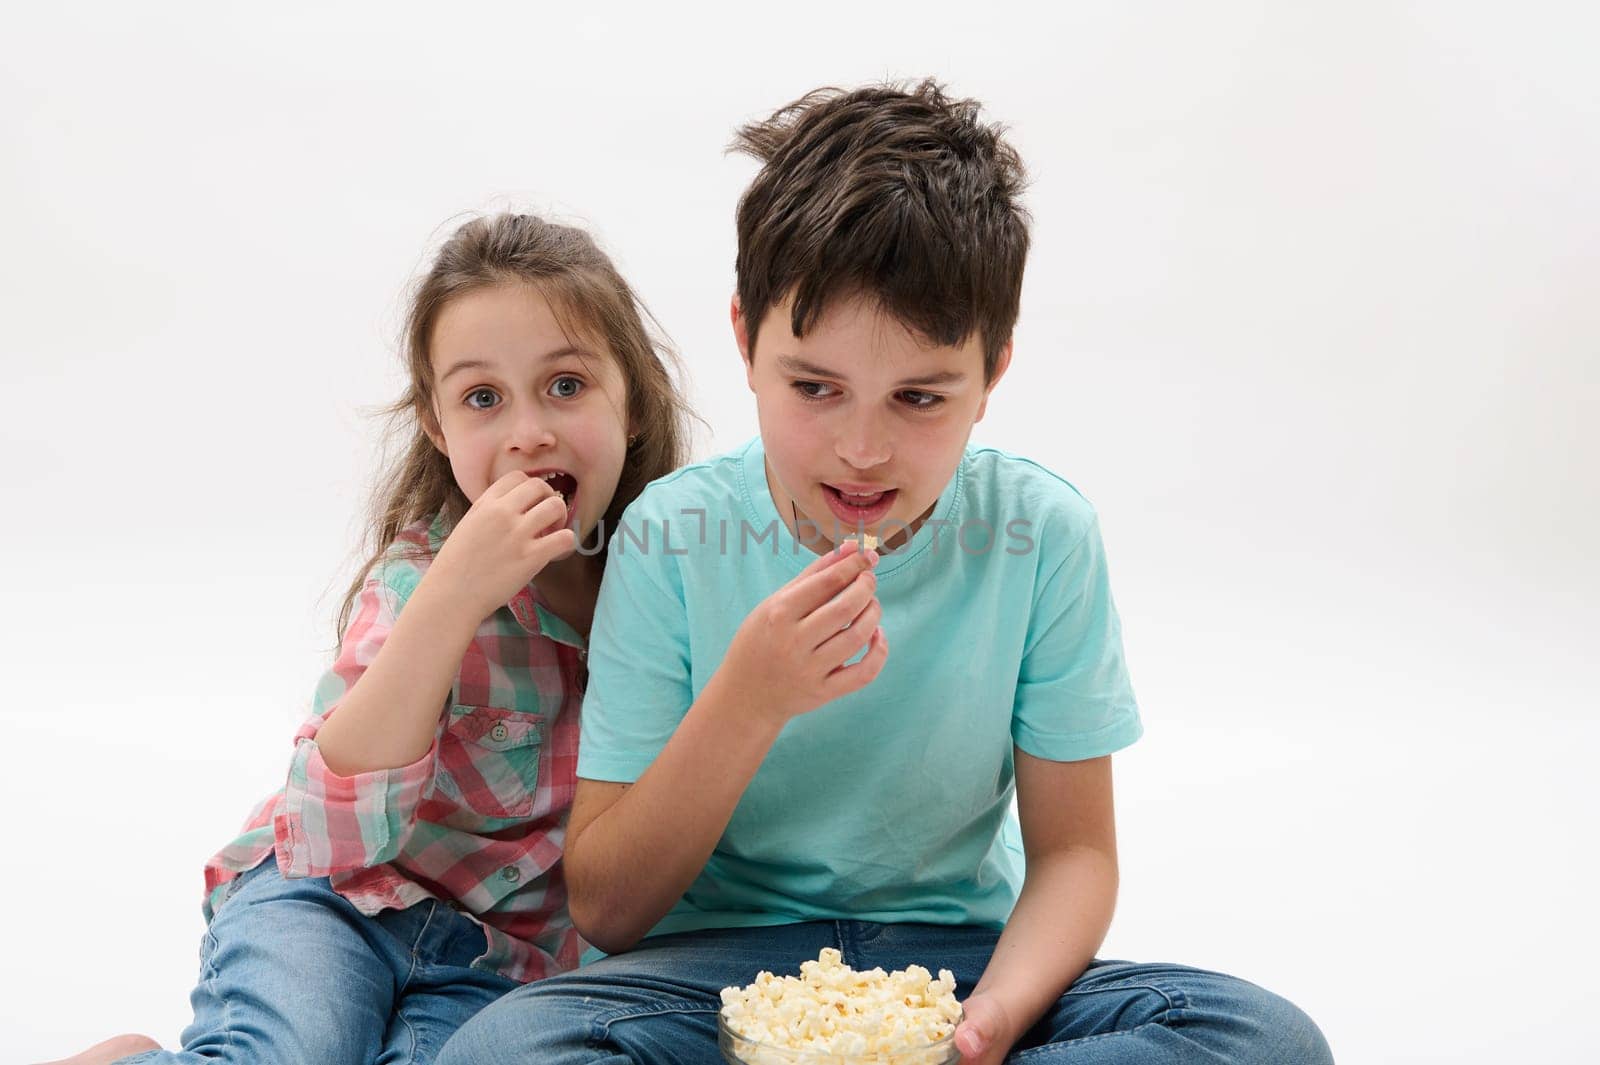 Caucasian adorable cheerful happy kids, preteen boy and little girl eating popcorn, watching movie or cartoons, smiling looking toward the camera, sitting together on isolated white studio background